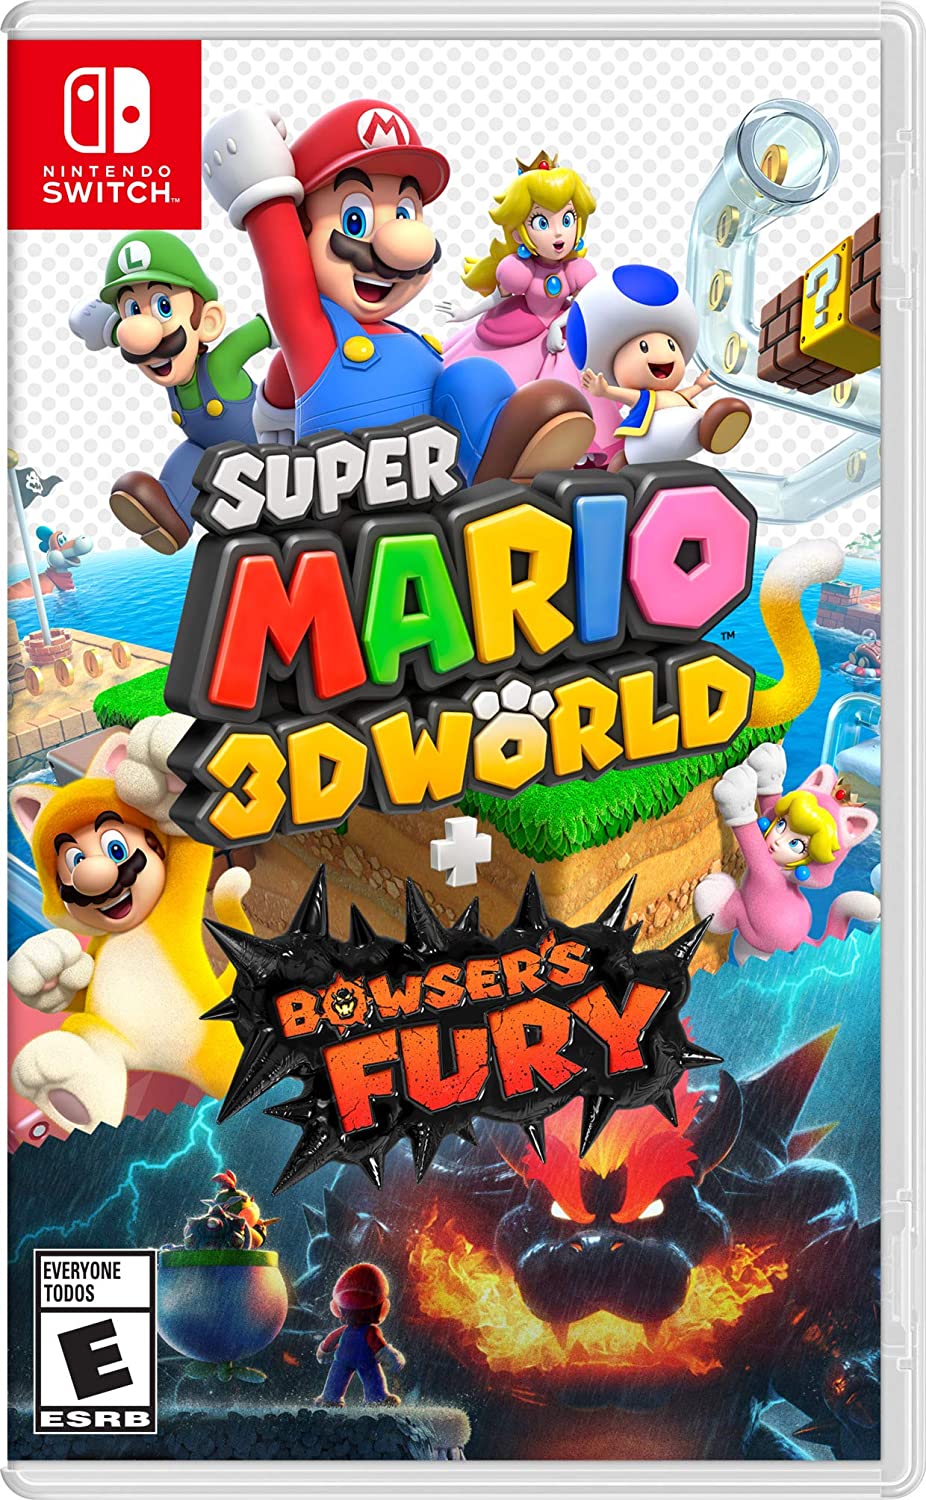 Mario 3D World Plus Bowsers Fury Reco